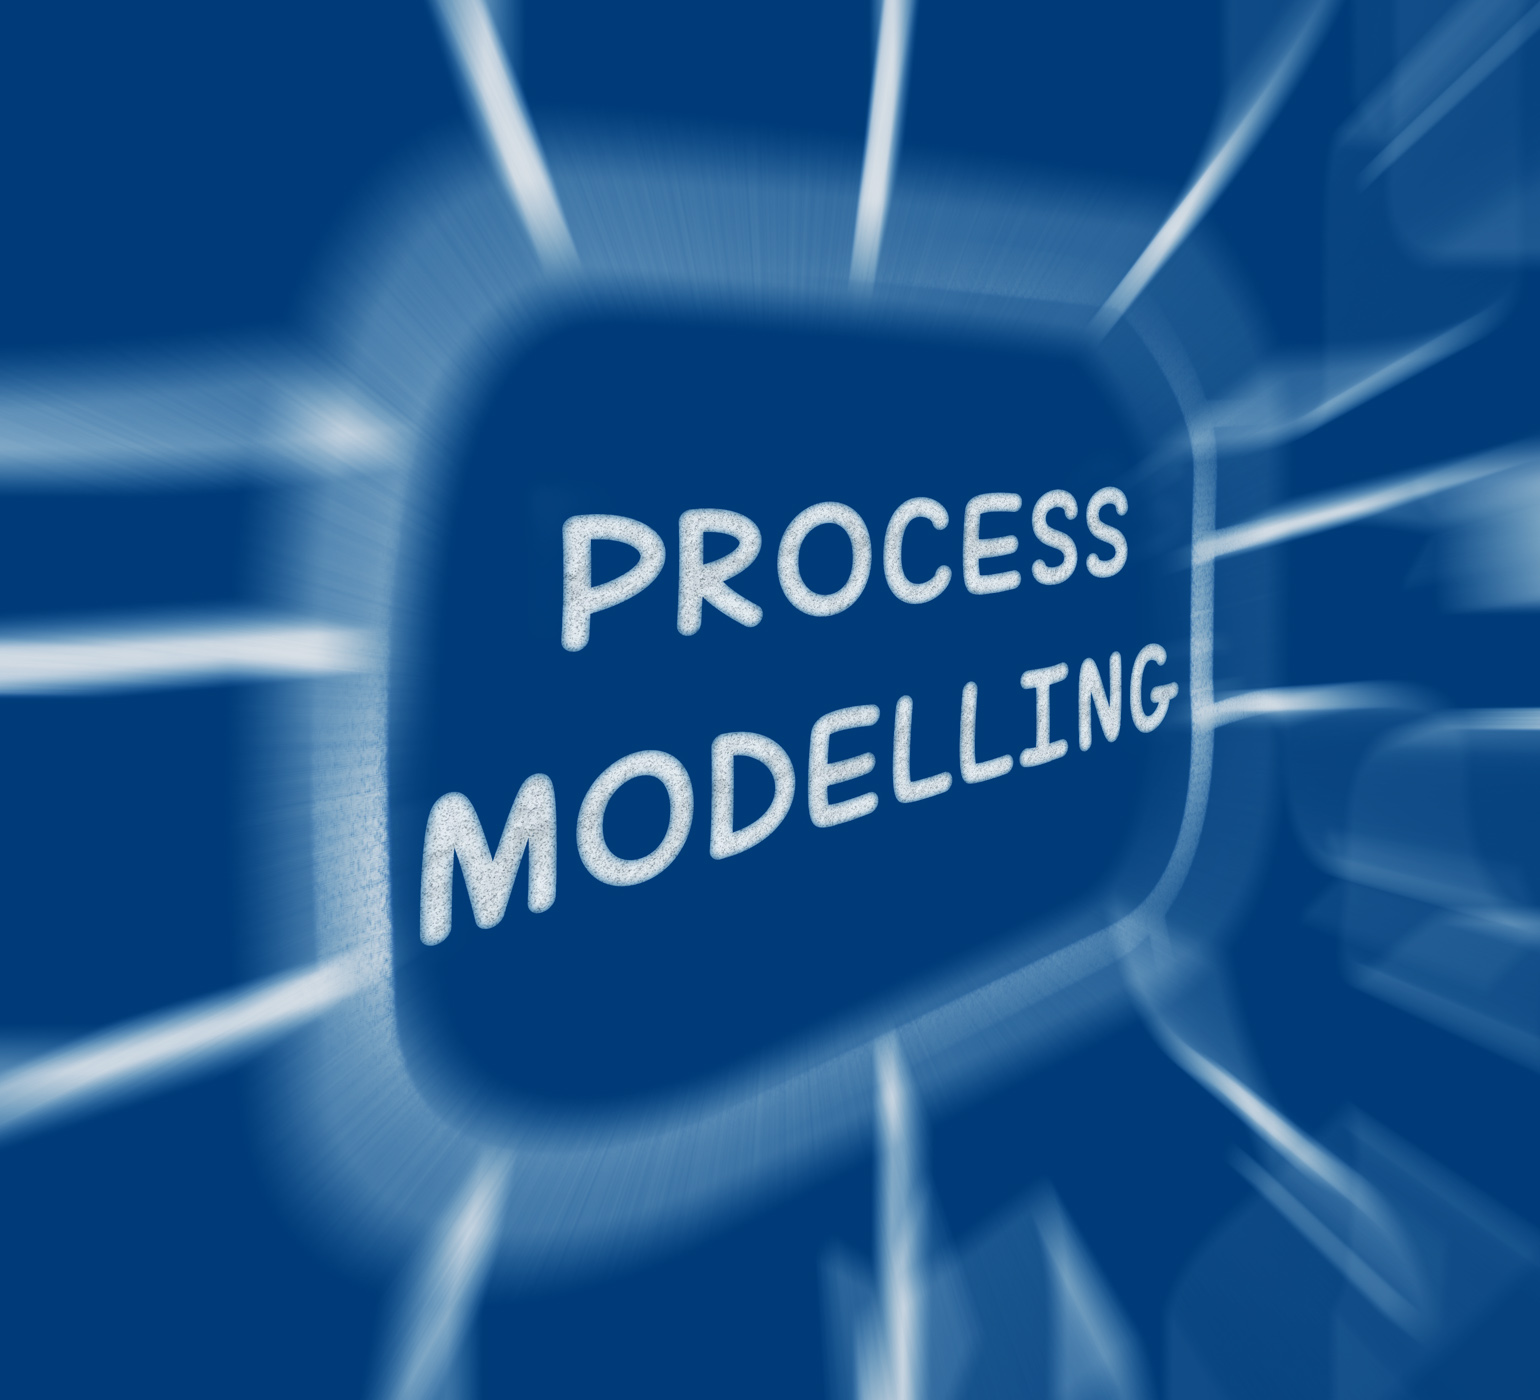 Process Modelling Diagram Displays Representing Business Processes, Analytical, Business, Diagram, Illustrate, HQ Photo